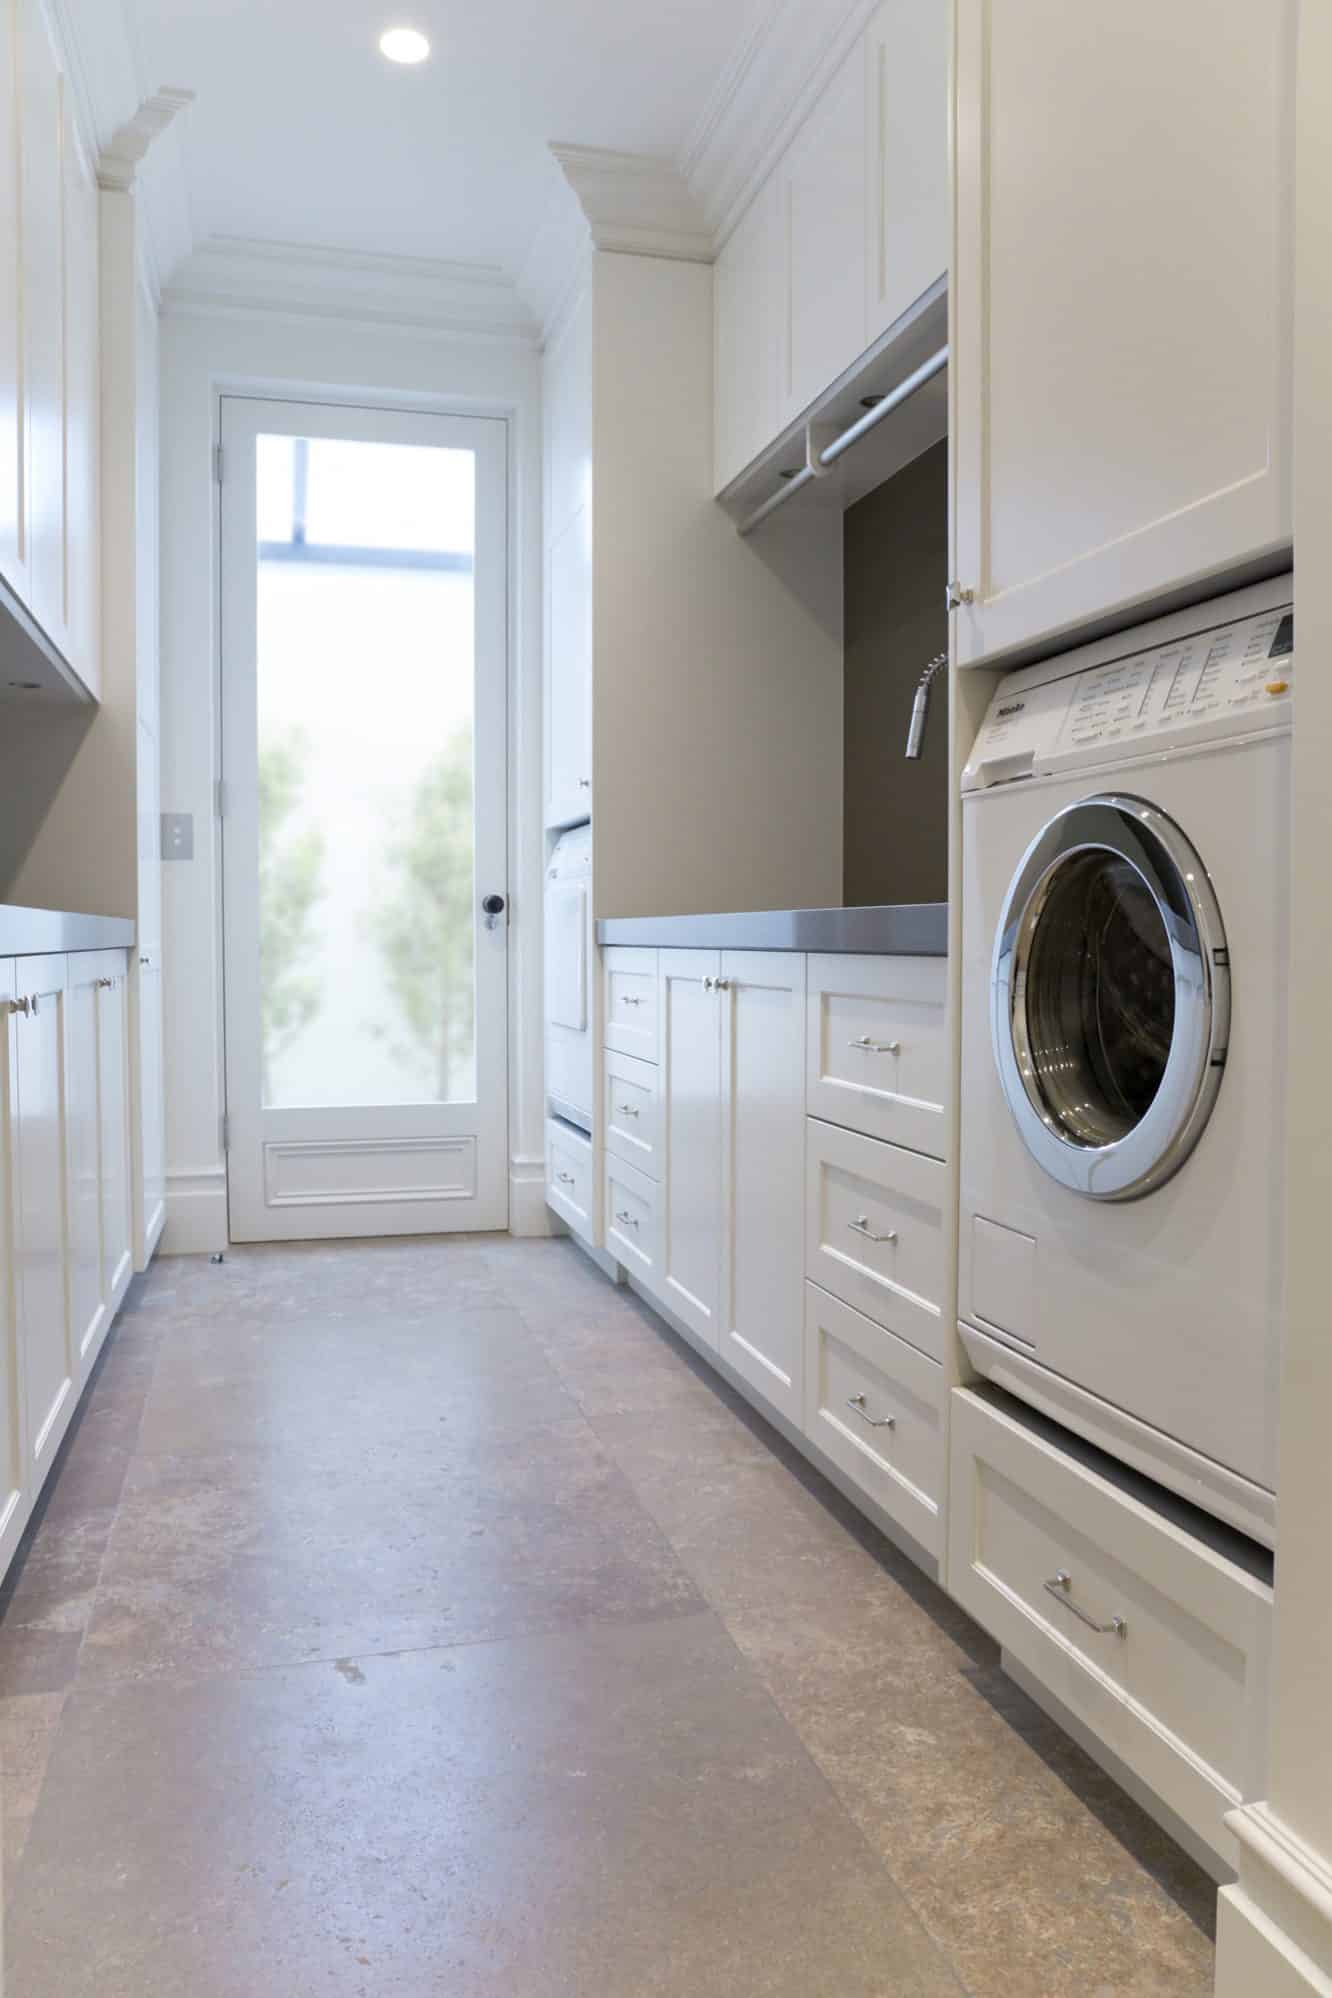 Built in Miele washer and dryer